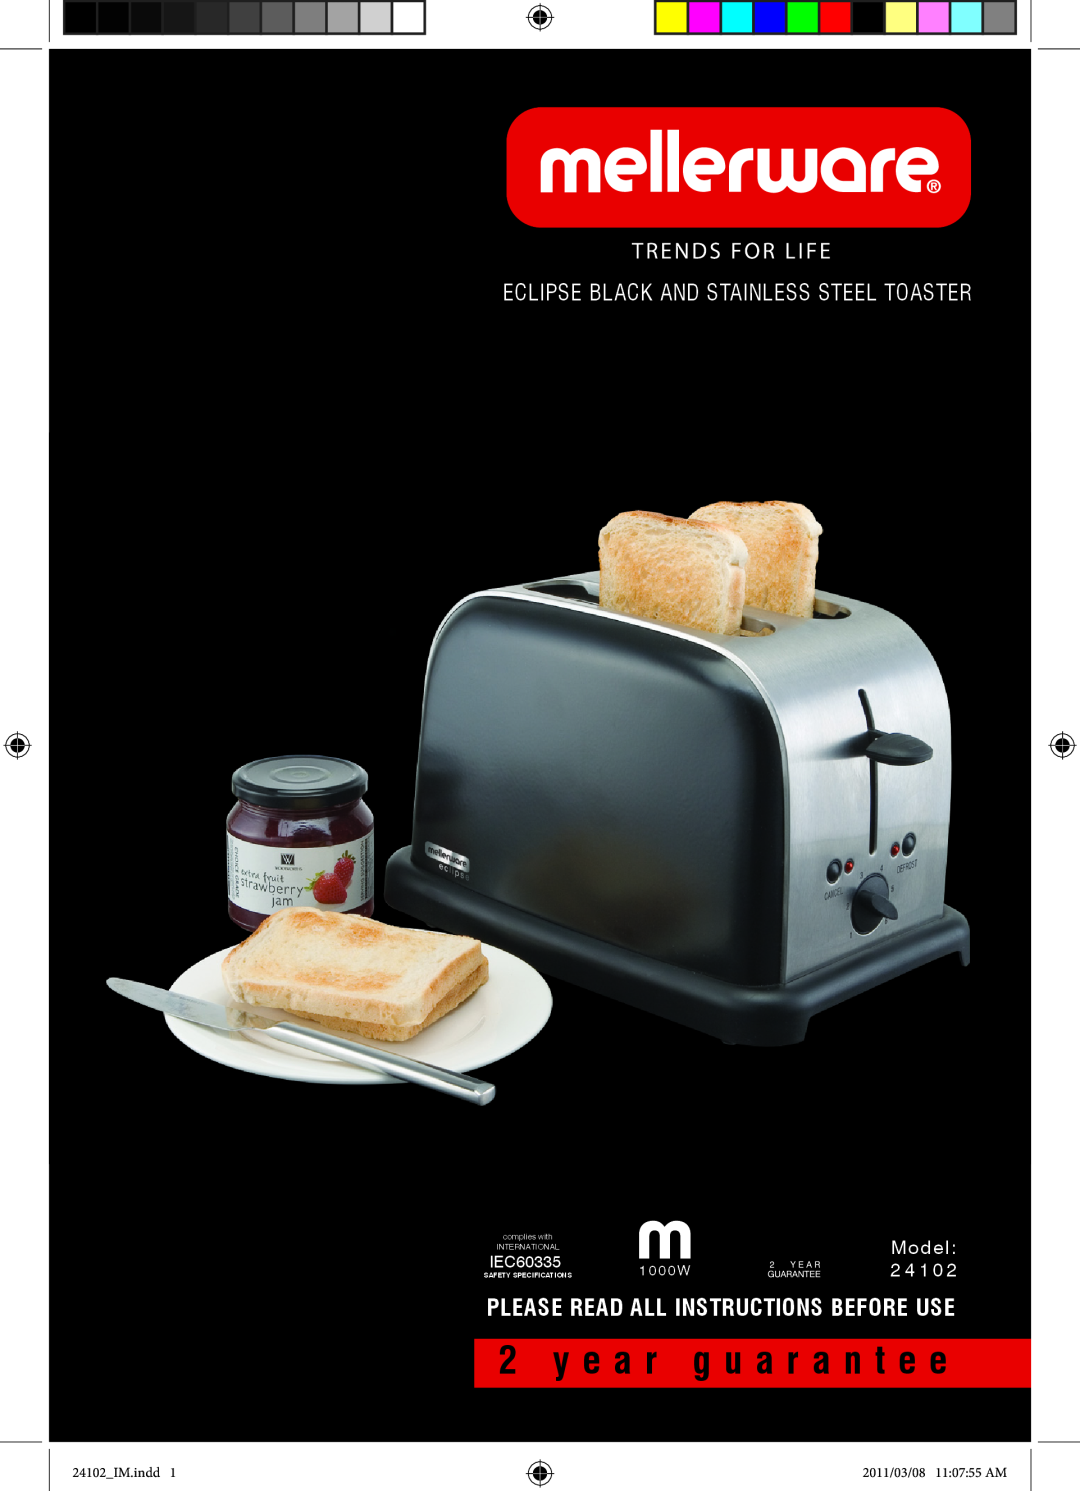 Mellerware 2 4 1 0 2 specifications y e a r g u a r a n t e e, Eclipse Black And Stainless Steel Toaster, Model, IEC60335 